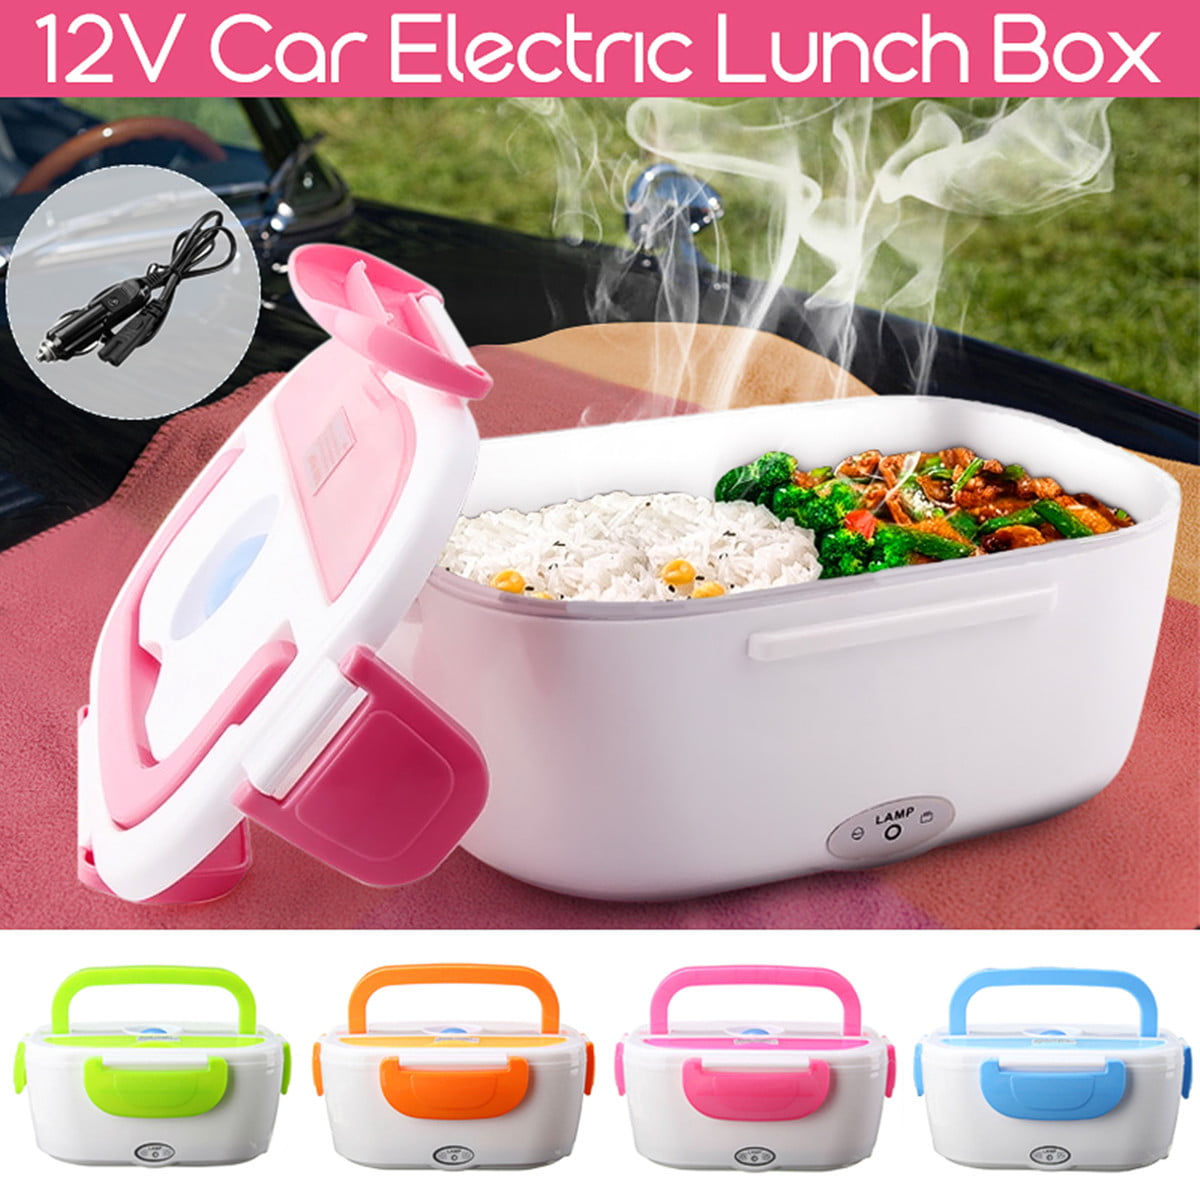 Portable Oven Electric Lunch Box Car Food Heating Insulated Warmers 12V 110V US